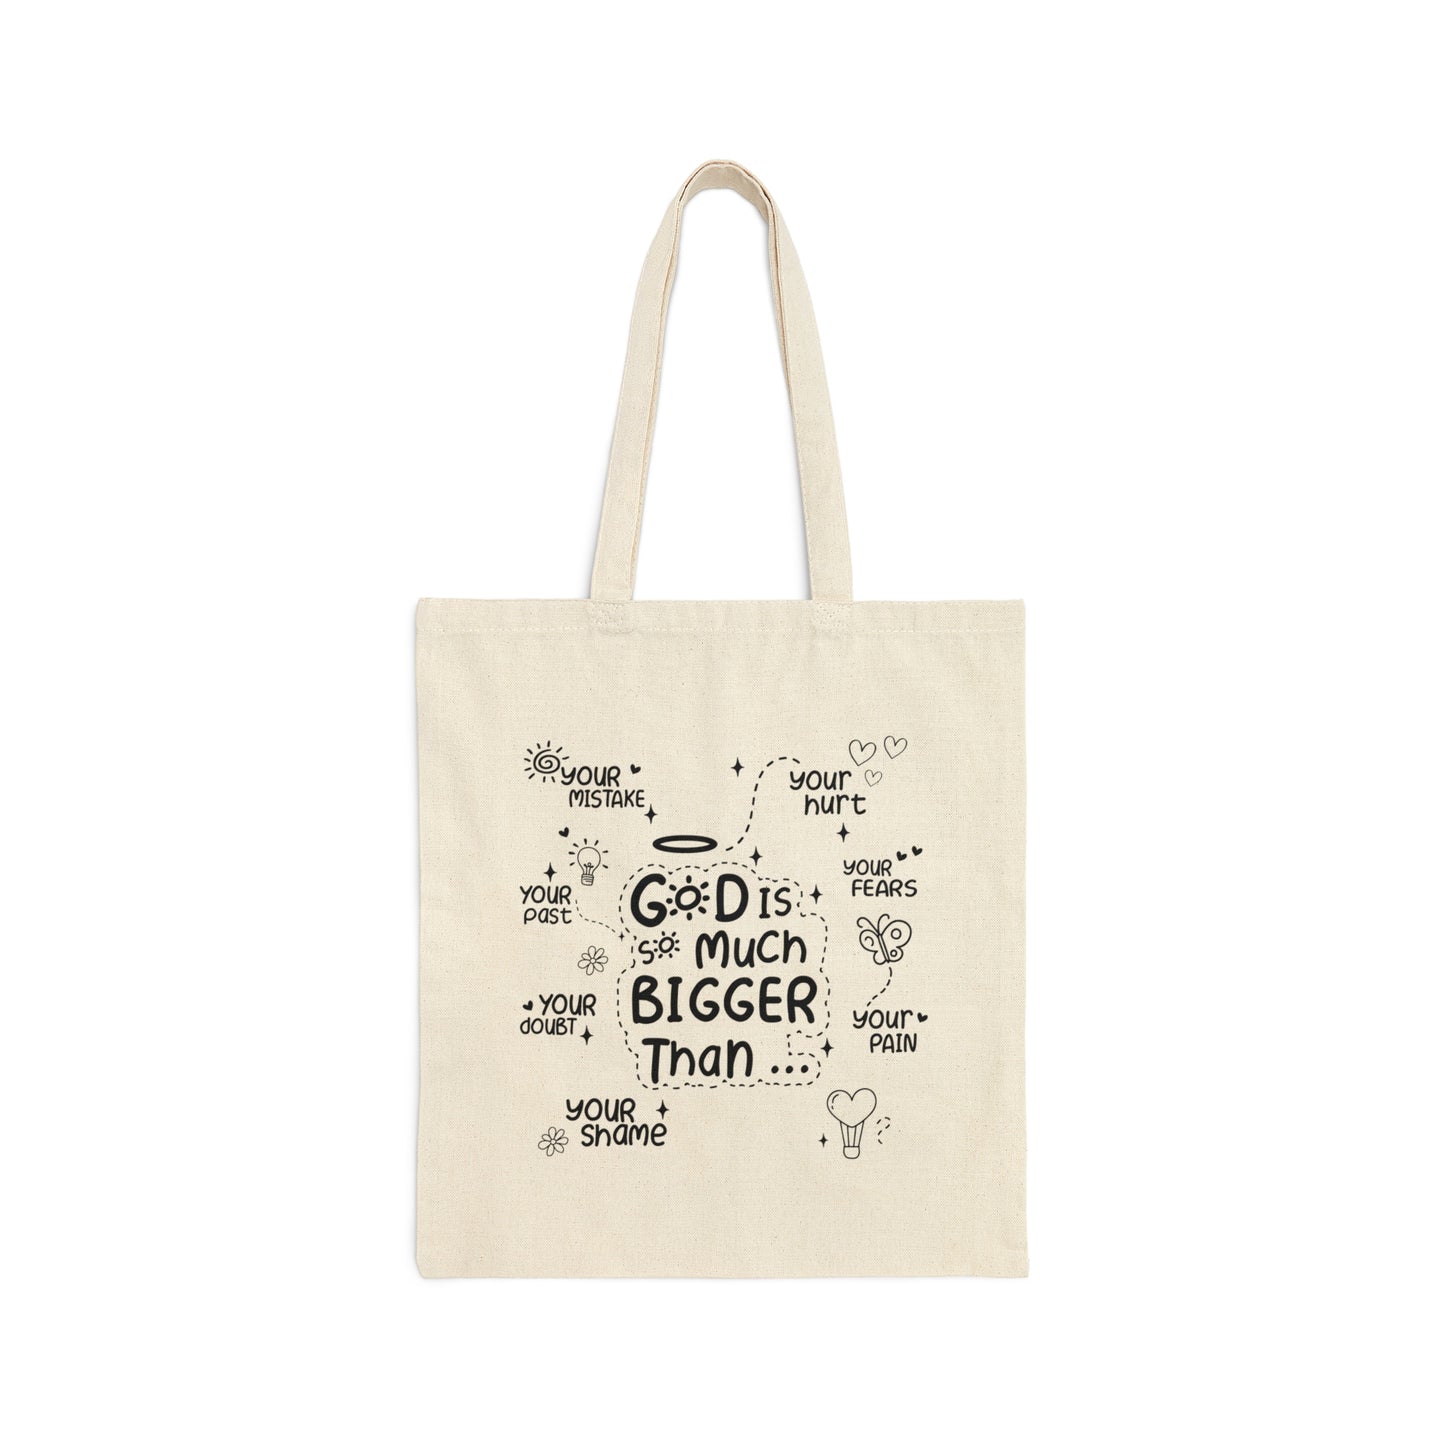 God is greater Cotton Canvas Tote Bag